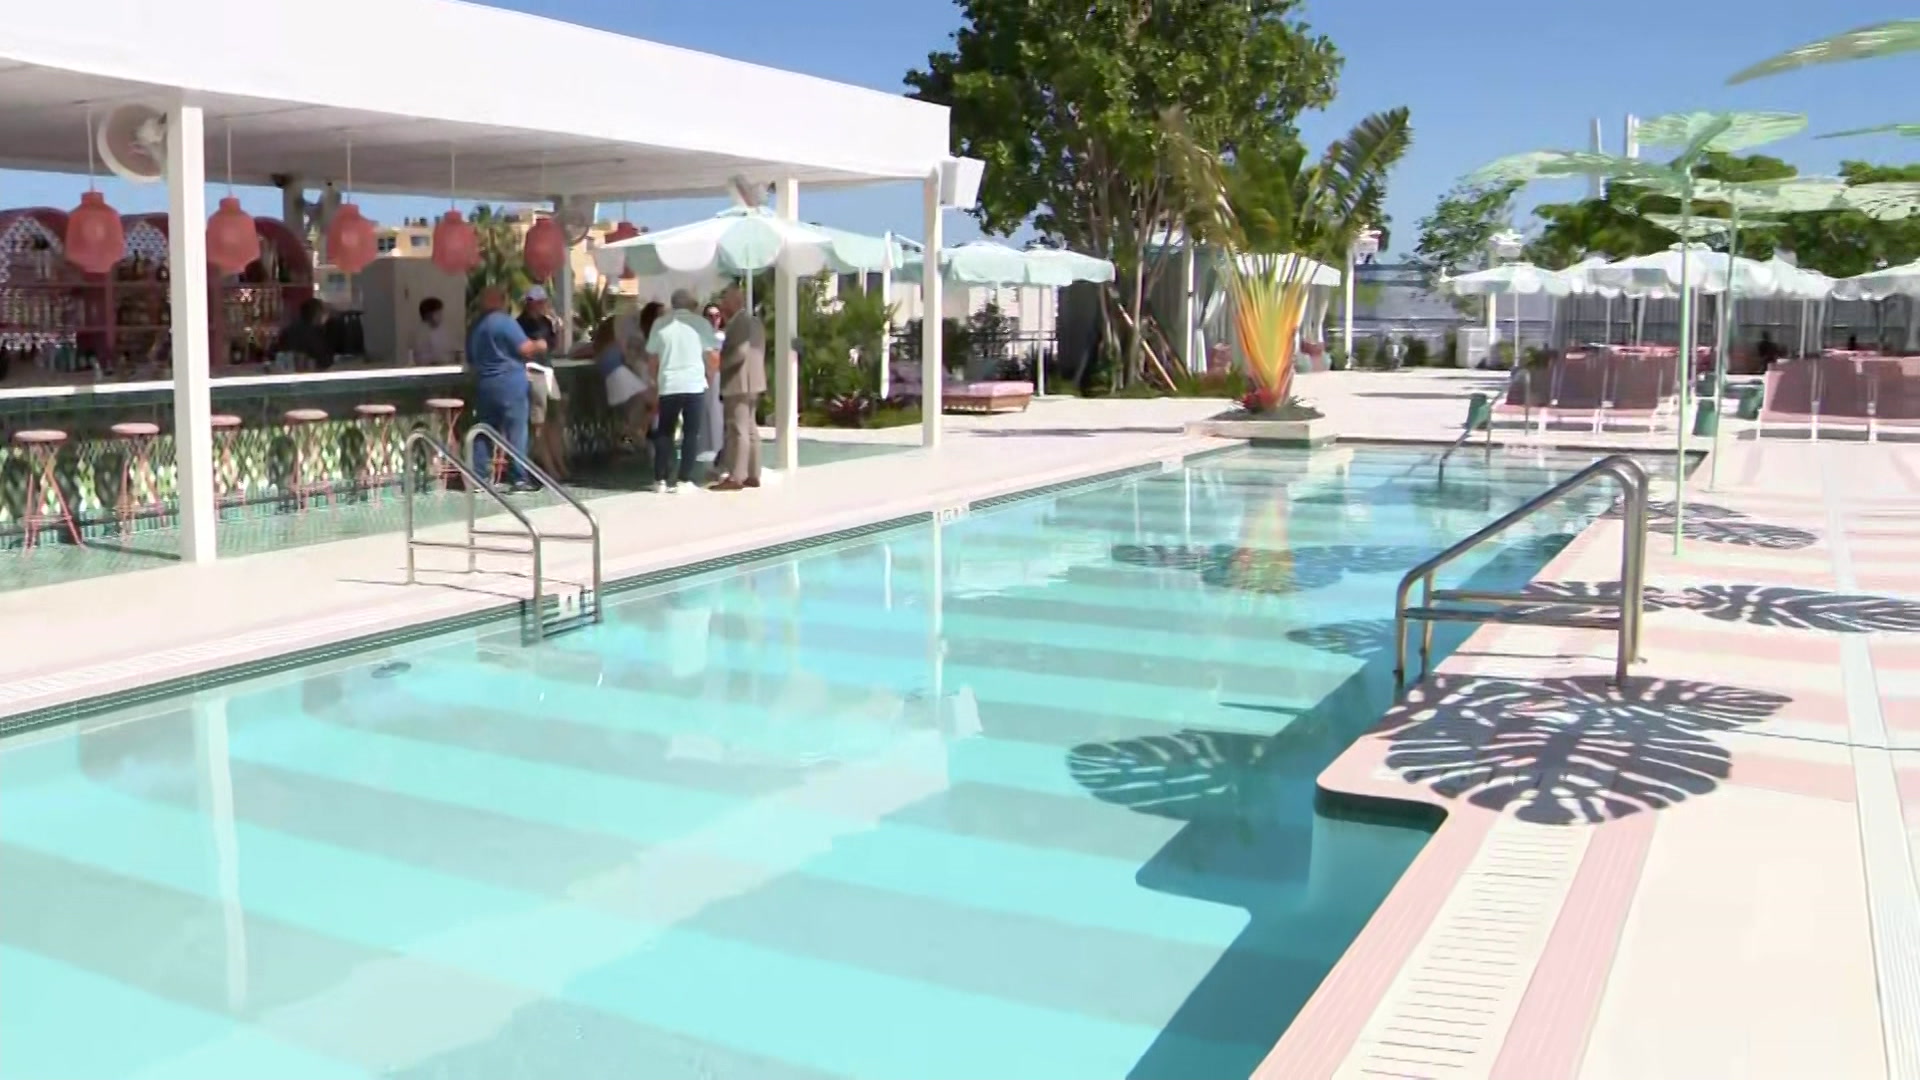 World-Famous Artist Pharrell Williams Teams Up Nightlife King Dave Grutman To Bring Goodtime Hotel To Miami Beach